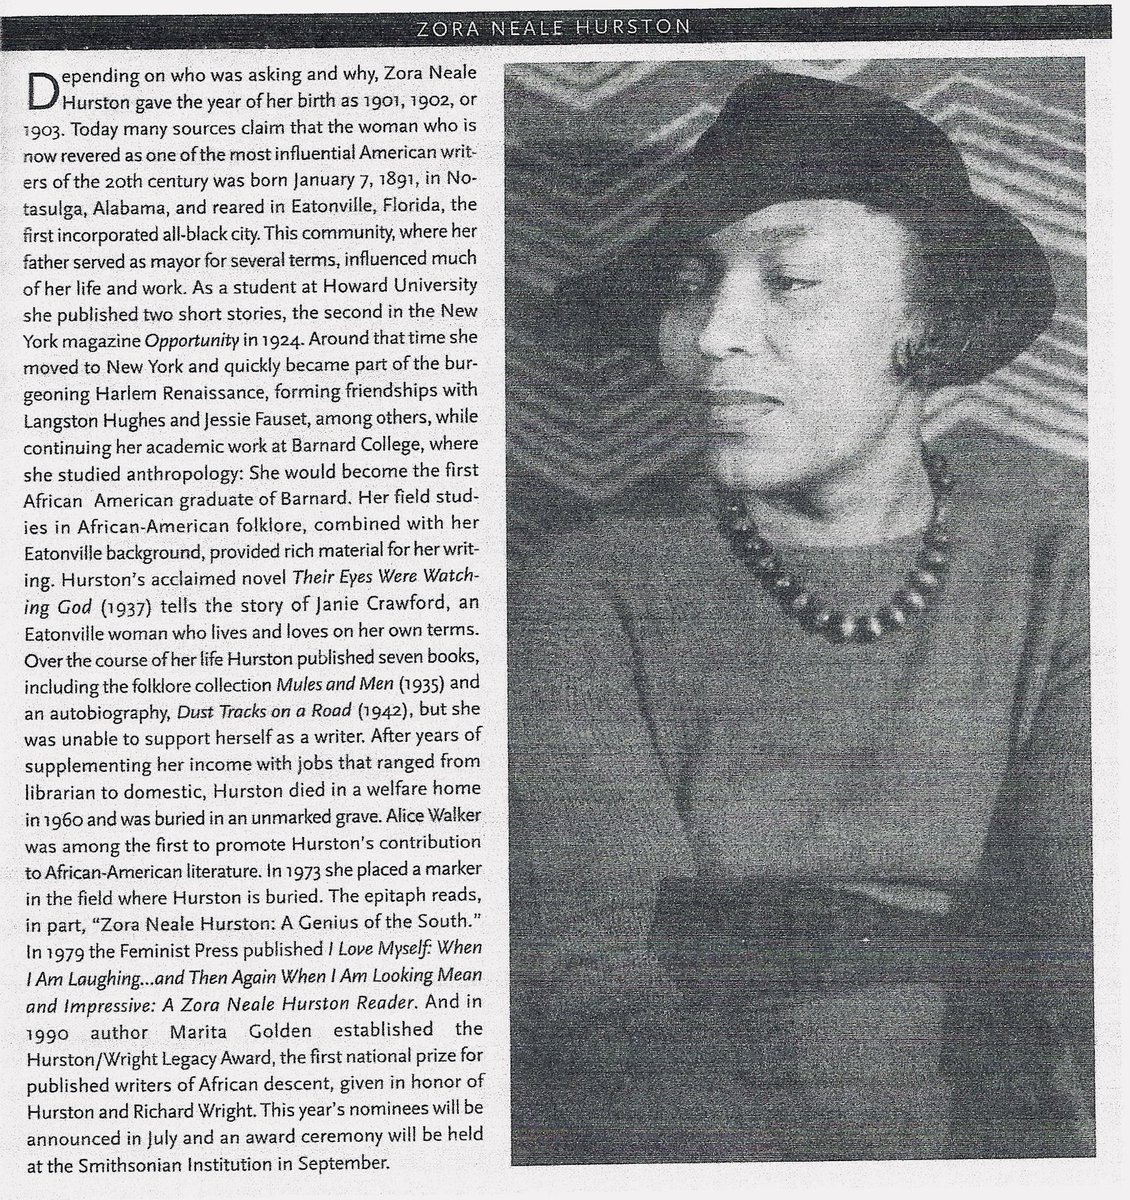 Found this Jan/Feb 2002 issue of “Poets & Writers” magazine in my archive with two wonderful short articles: 1 on poet Langston Hughes and 1 on novelist Zora Neale Hurston. The article on Ethiopian ✍🏽 Nega Mezlekia was too long to include. 
#BHM 
#LangstonHughes #ZoraNealeHurston